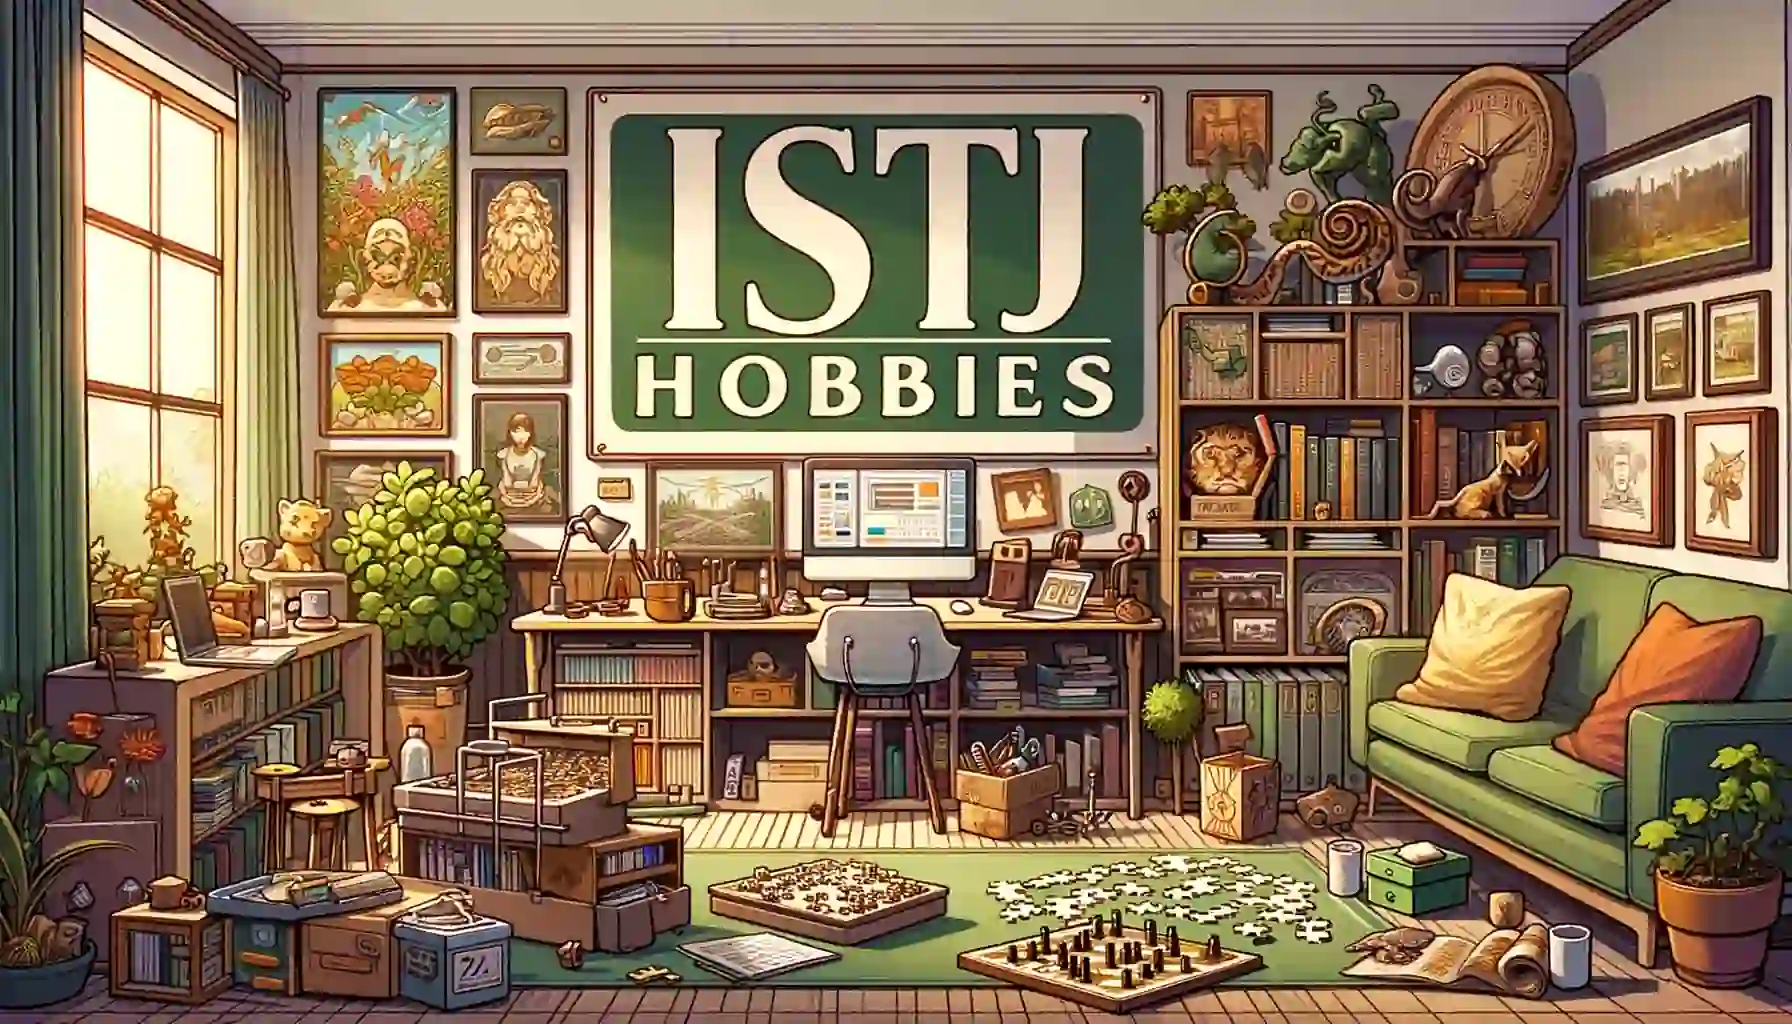 Ultimate ISTJ Hobbies to Add Order to Your Leisure Time